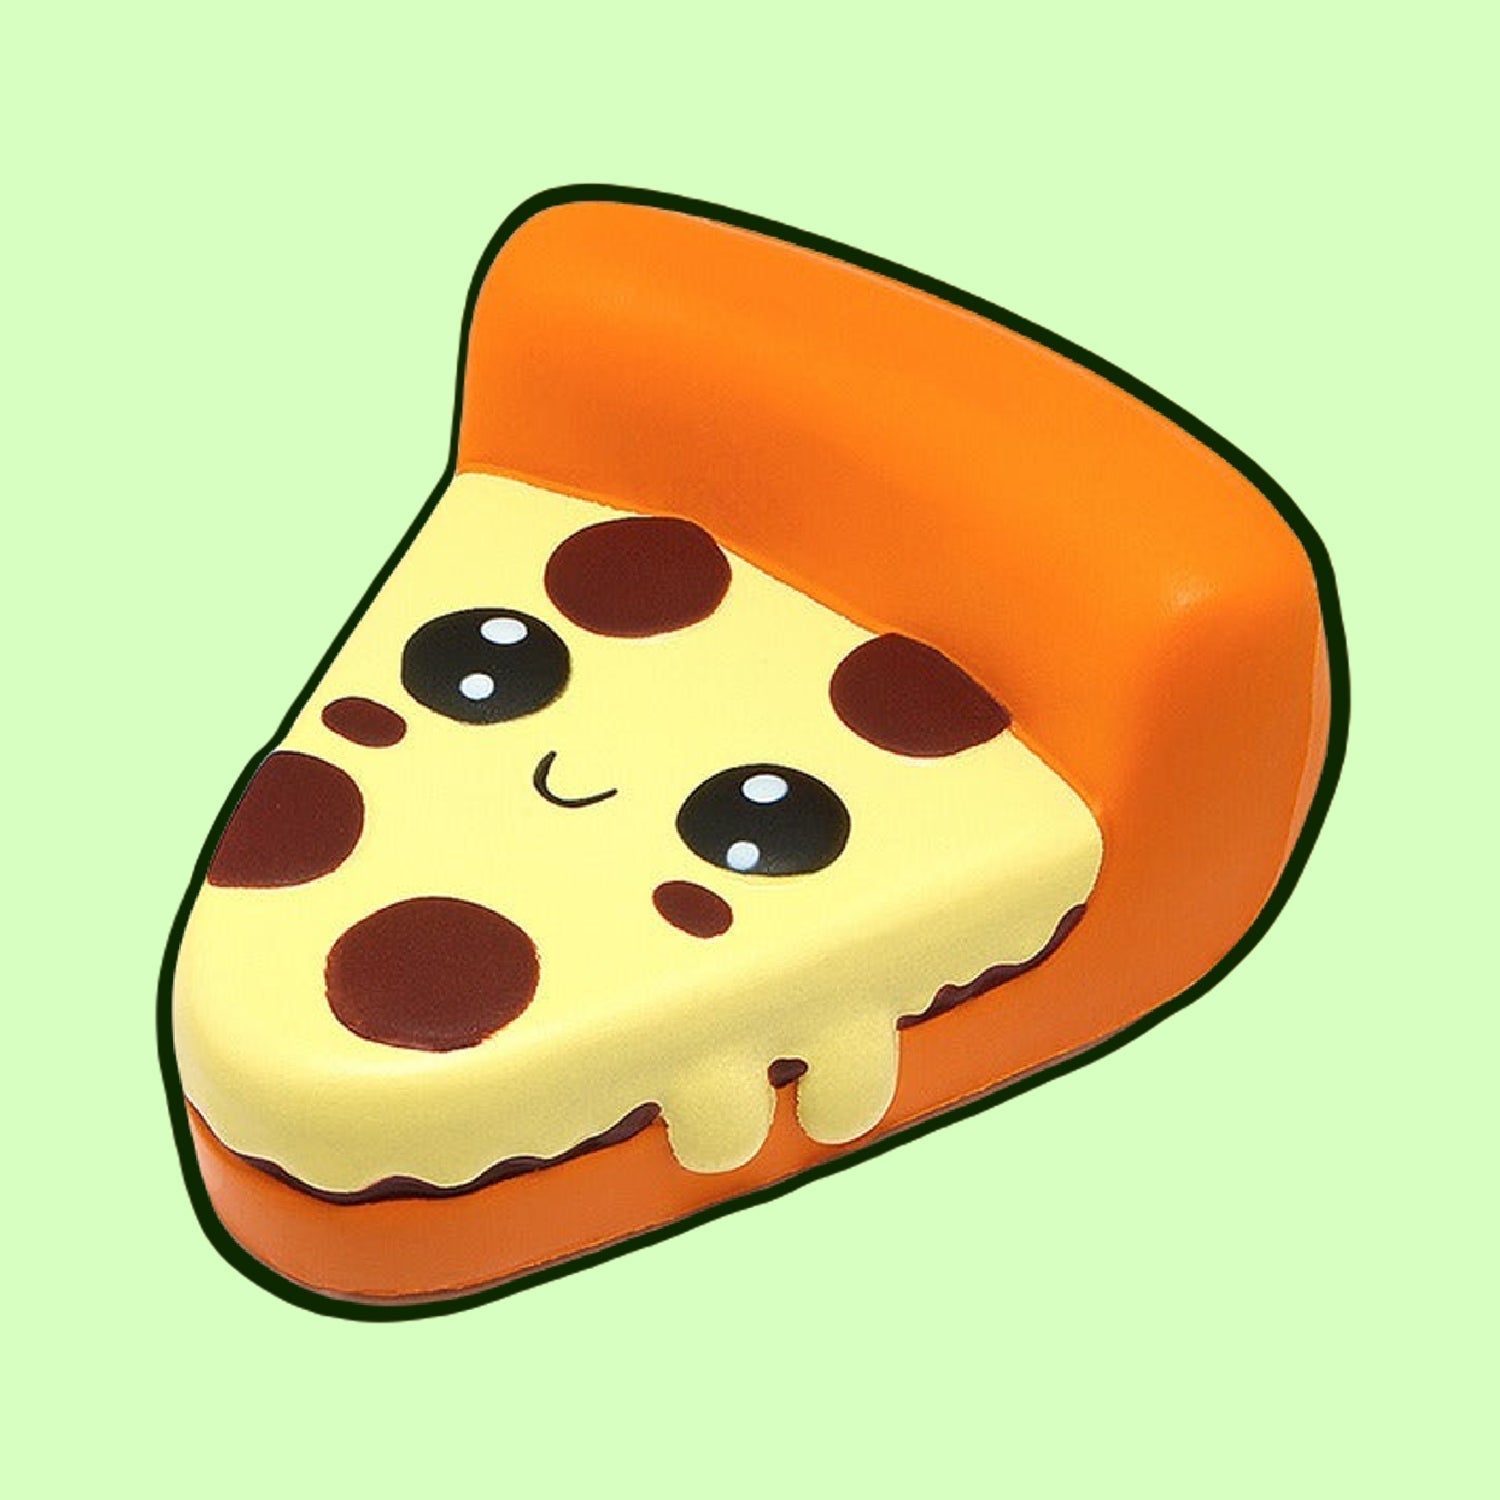 Cute Pizza Squishy Stress Relief Toy